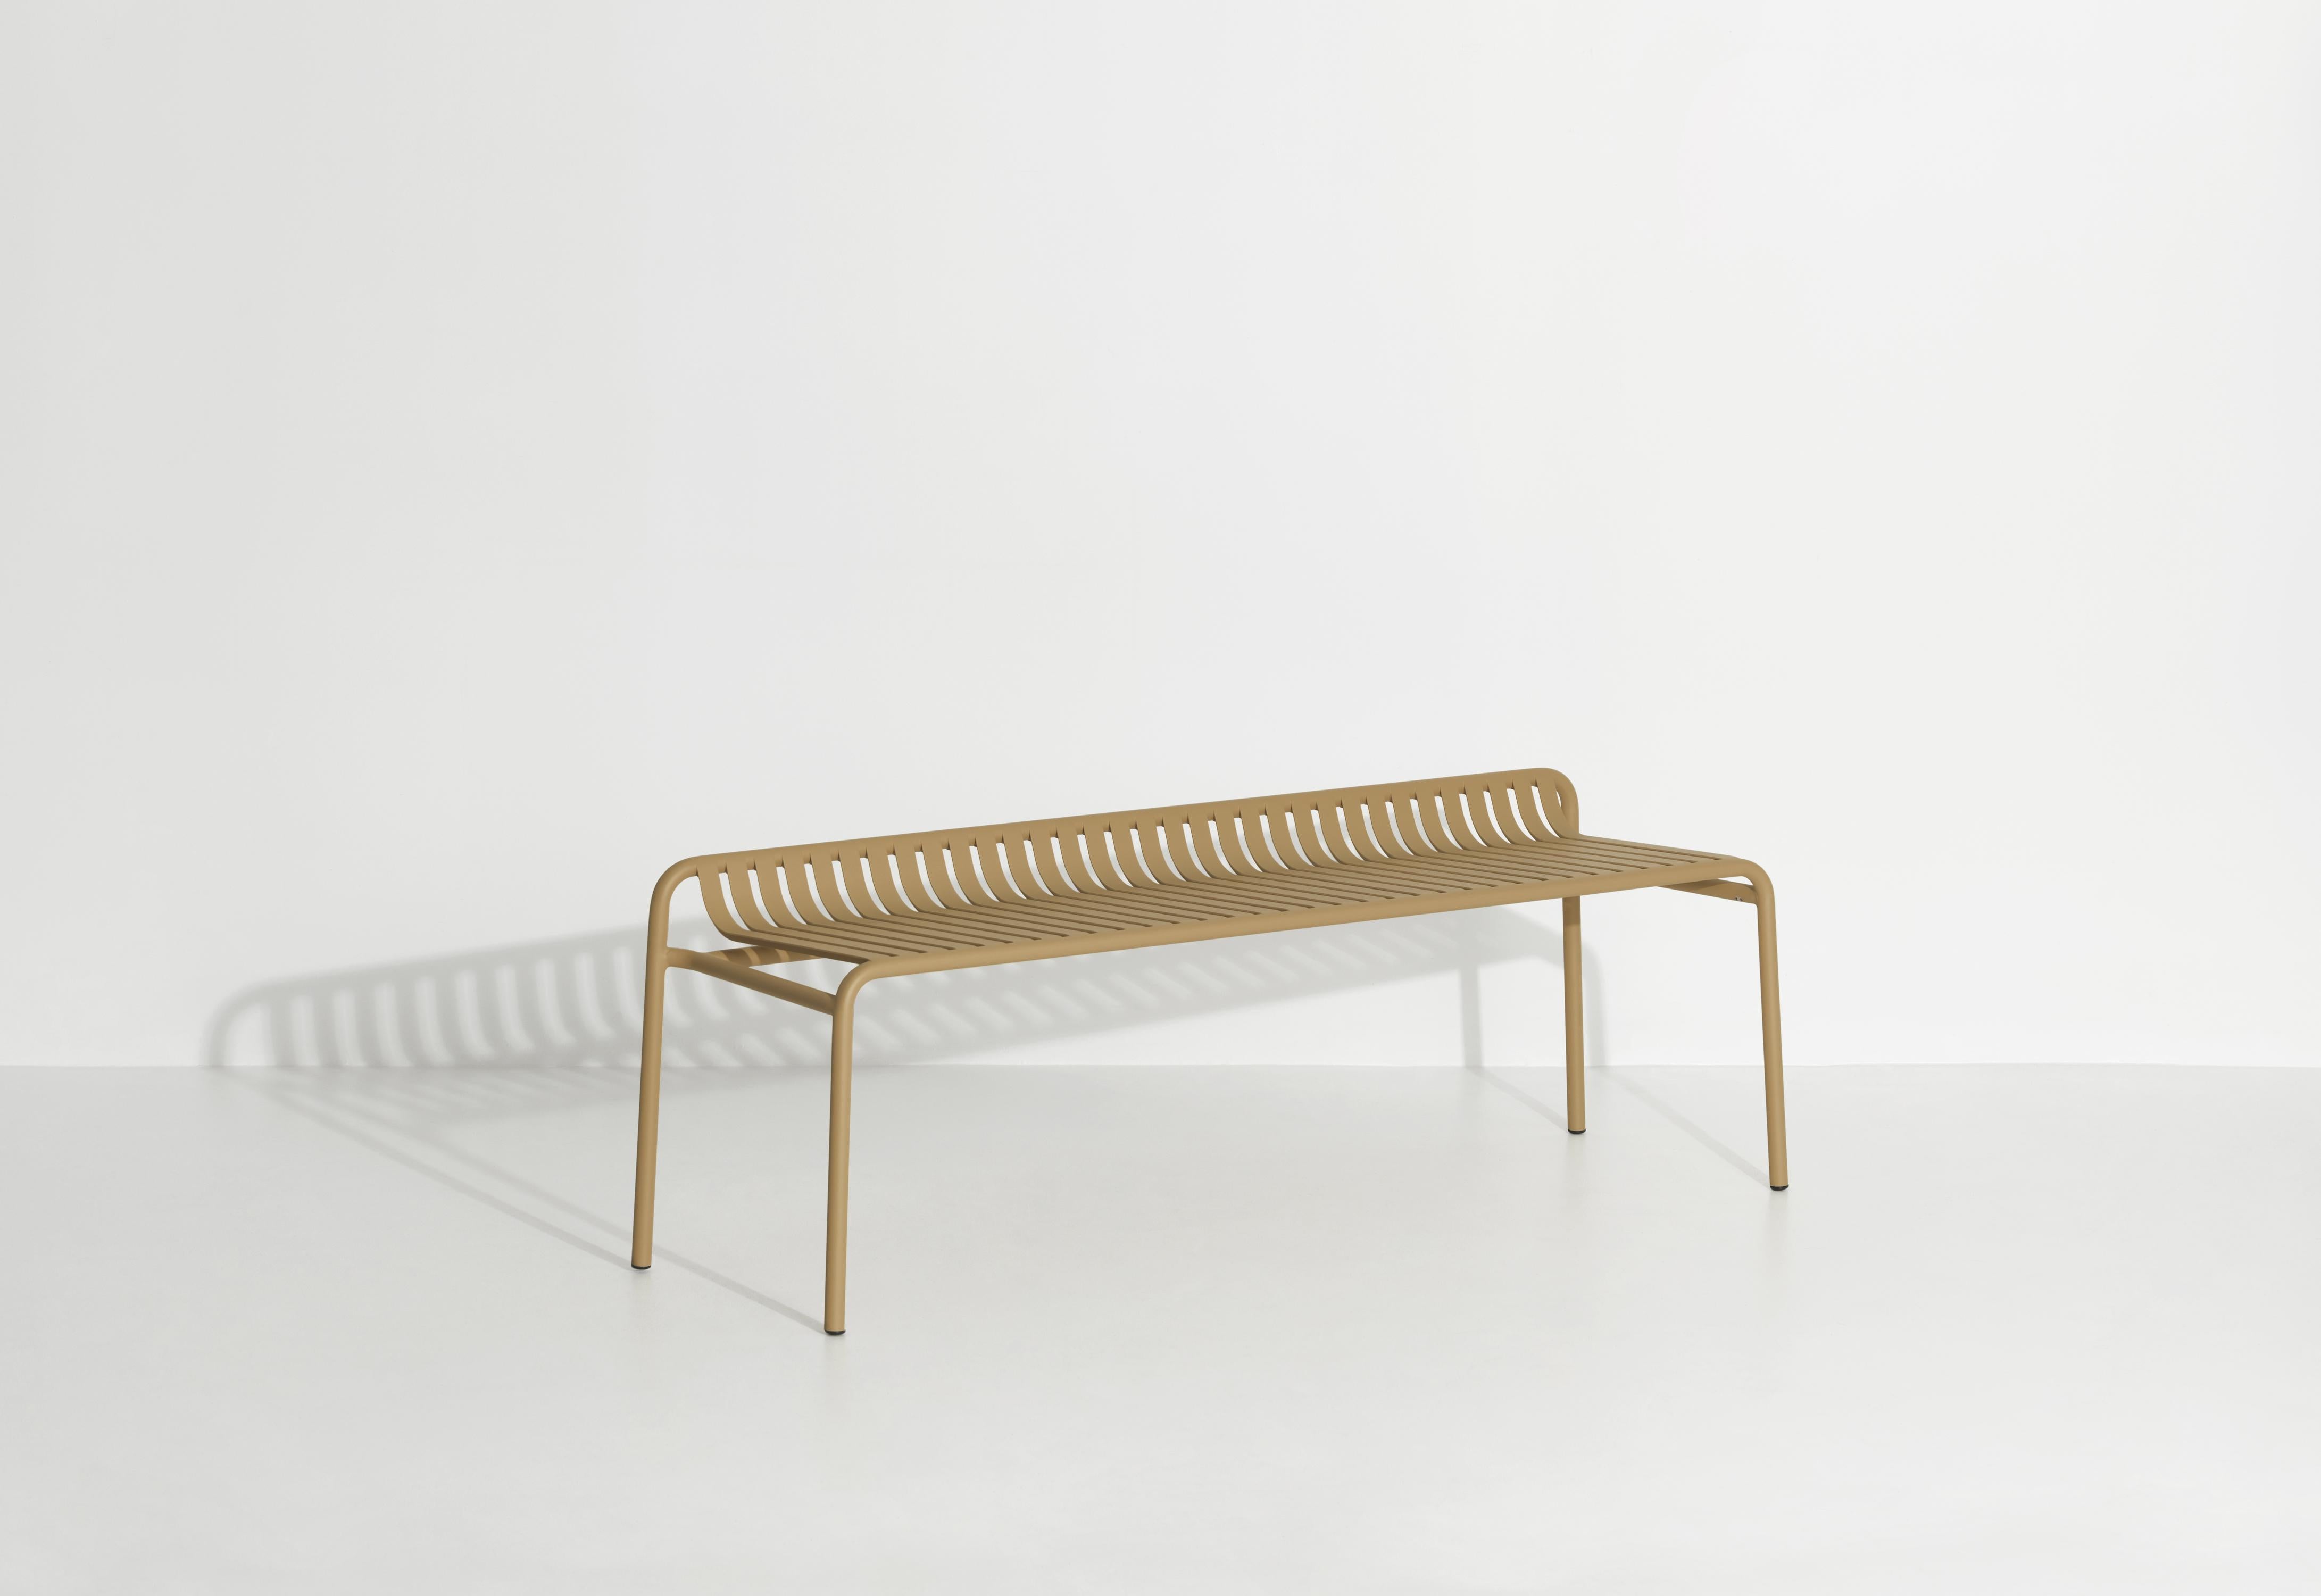 Petite Friture Week-End Bench without Back in Gold Aluminium by Studio BrichetZiegler, 2017

The week-end collection is a full range of outdoor furniture, in aluminium grained epoxy paint, matt finish, that includes 18 functions and 8 colours for